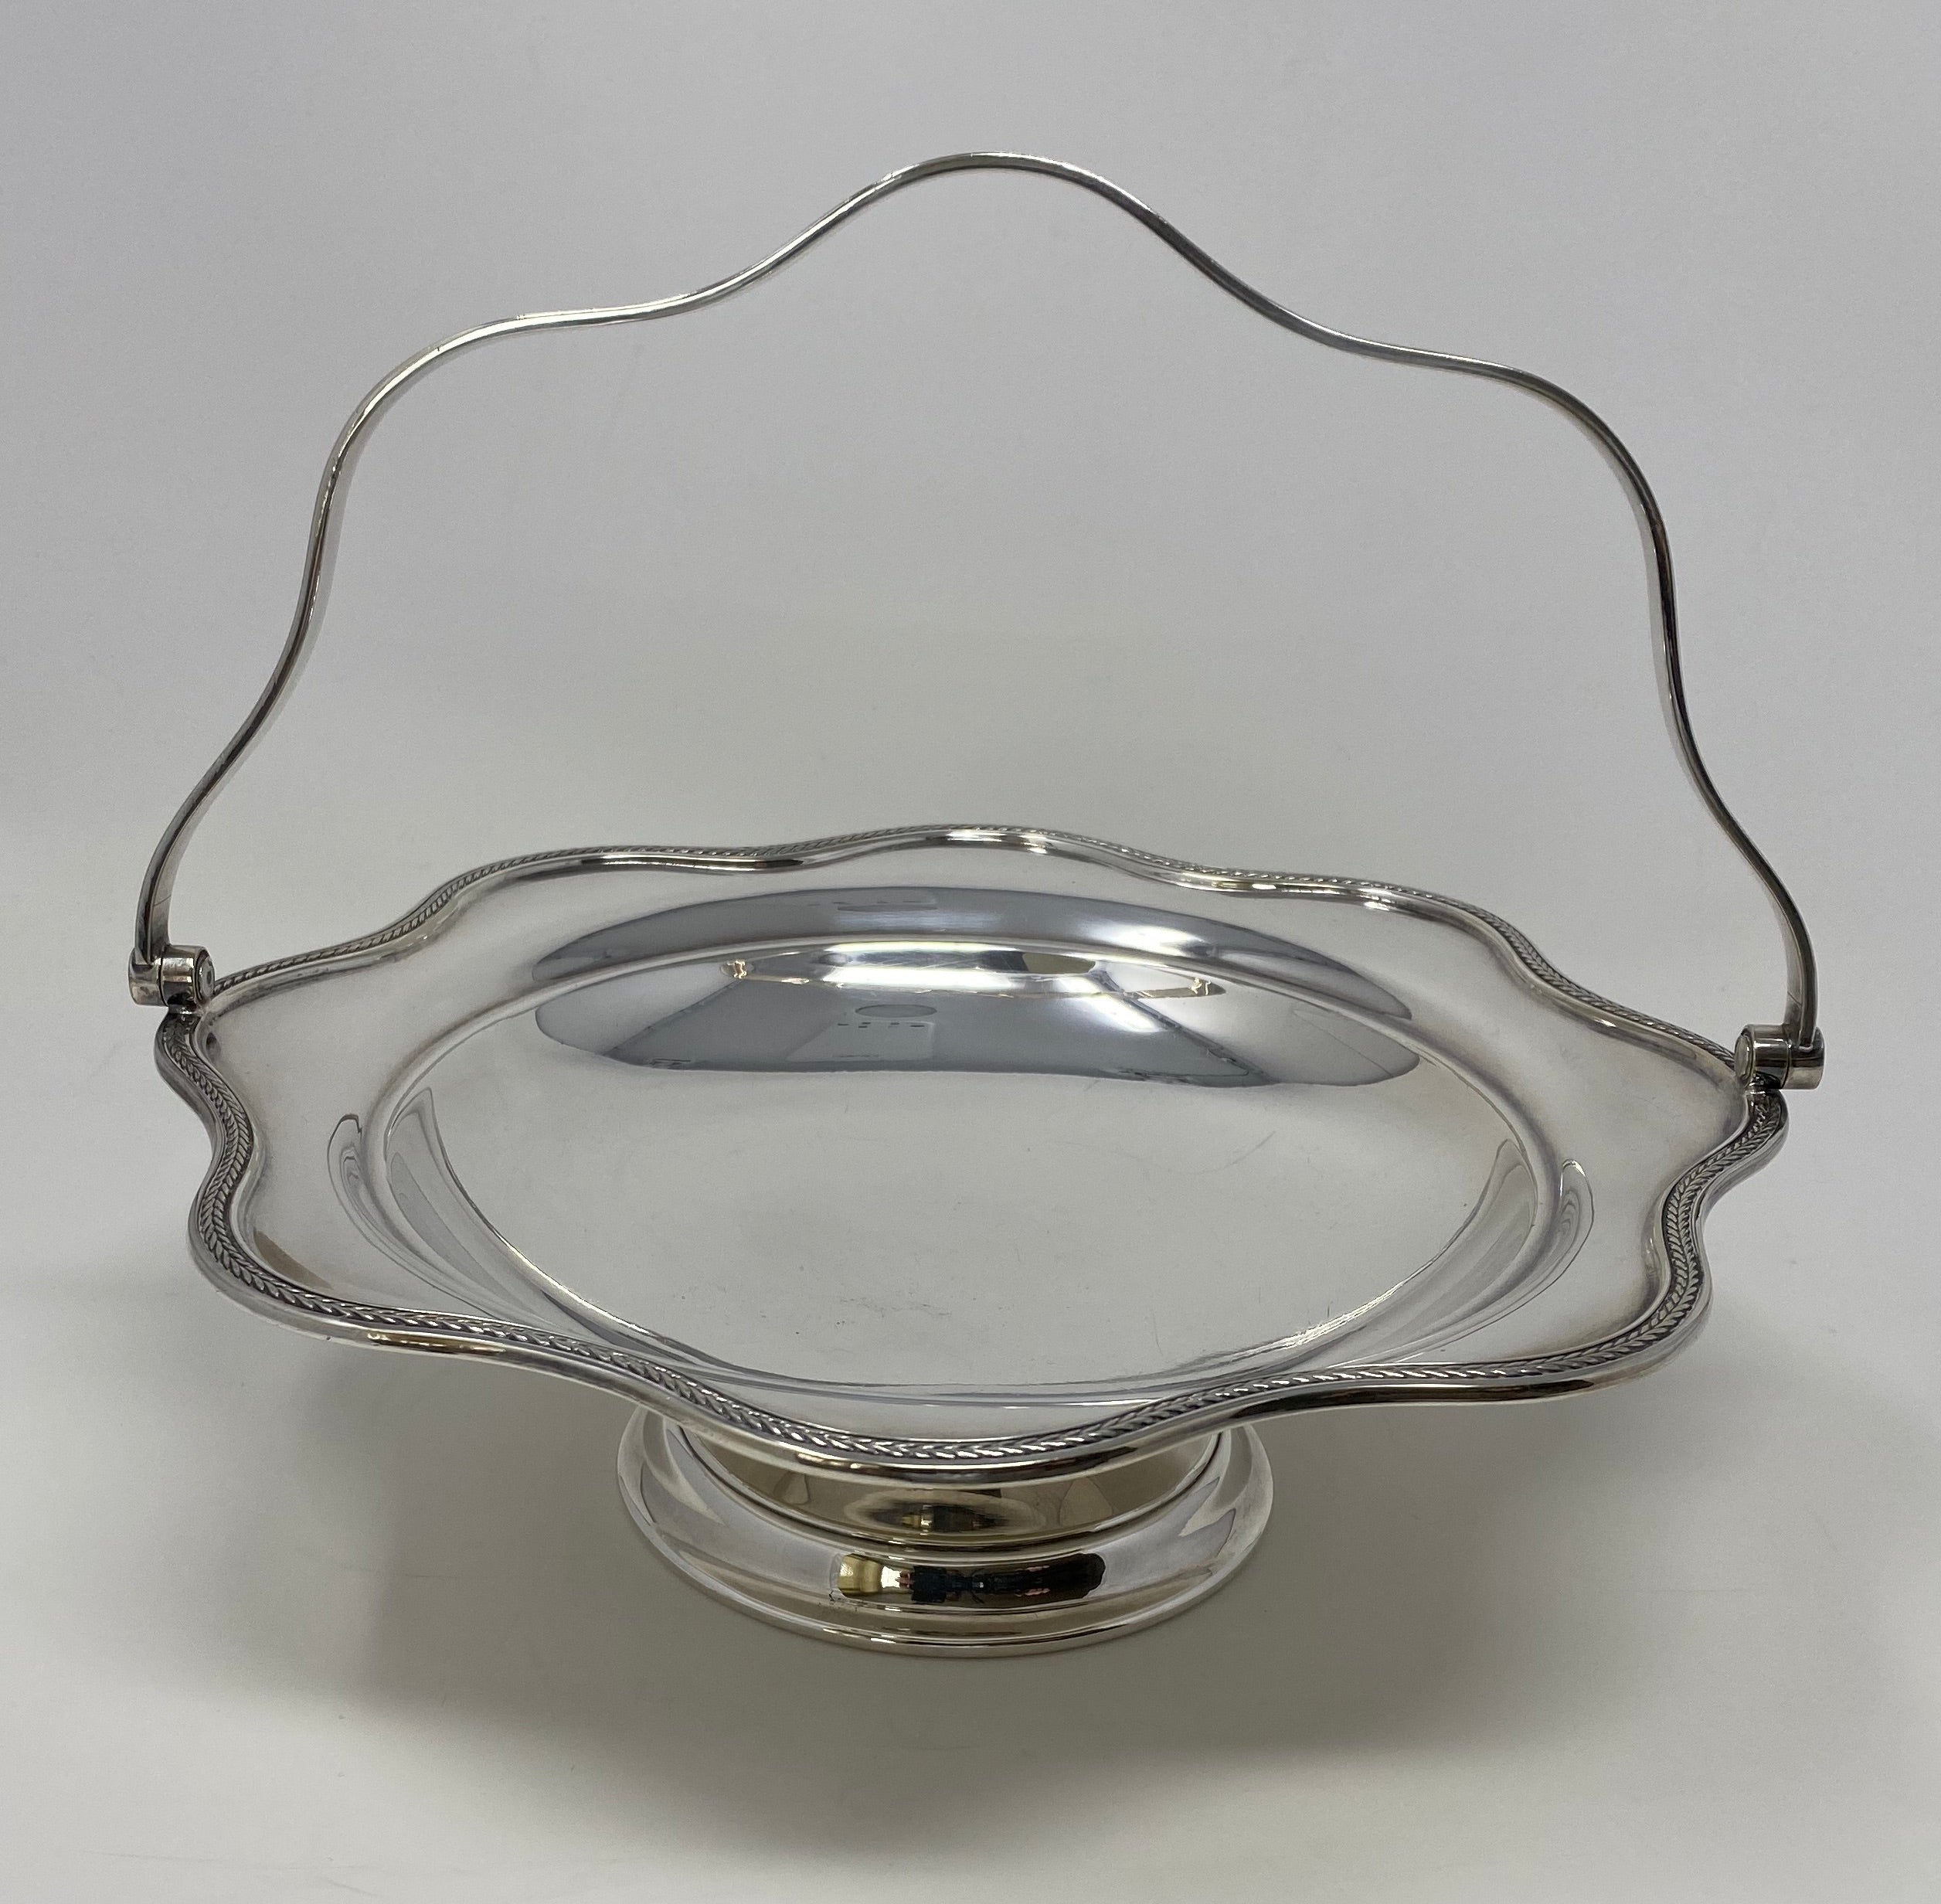 Antique silver Plated Cake Basket